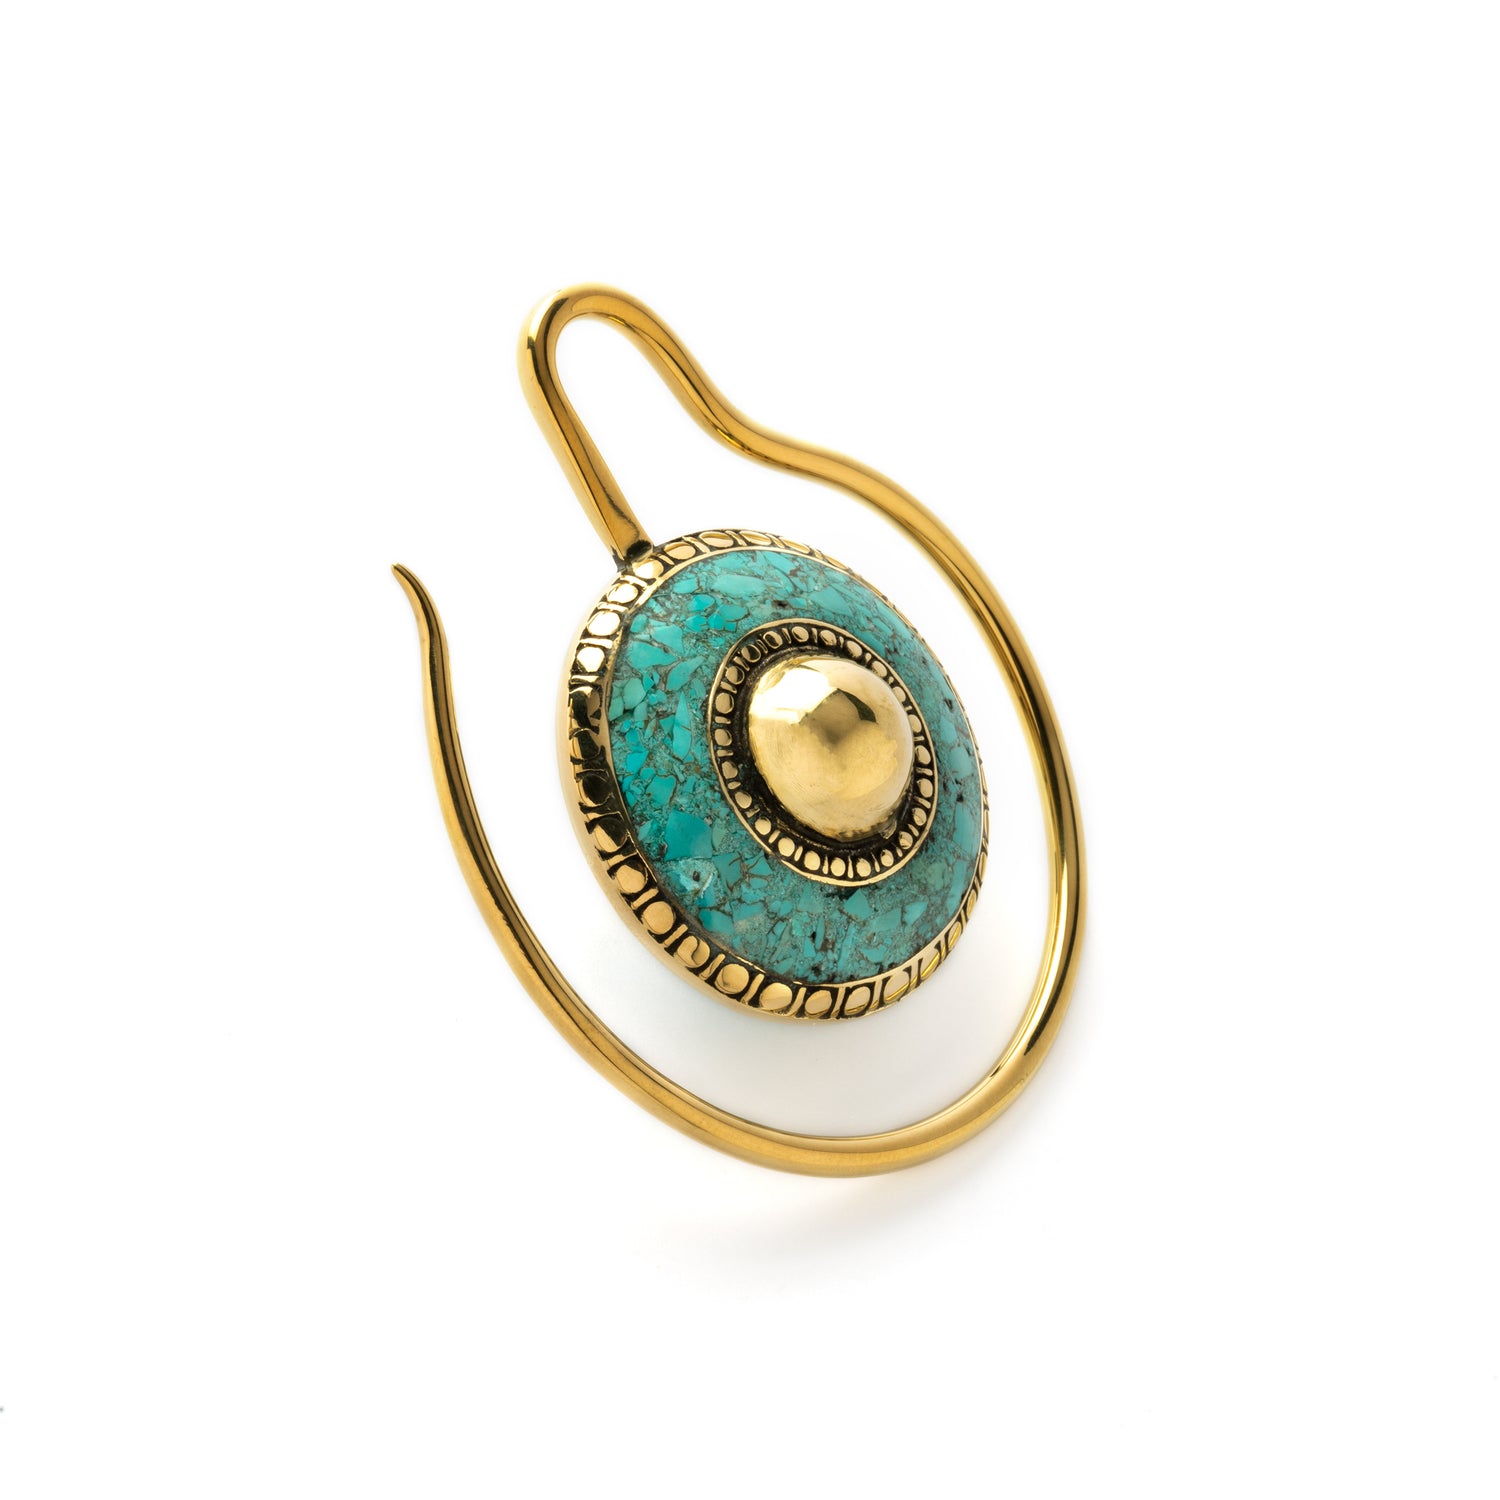 Shahee Turquoise ear weight hanger right side view